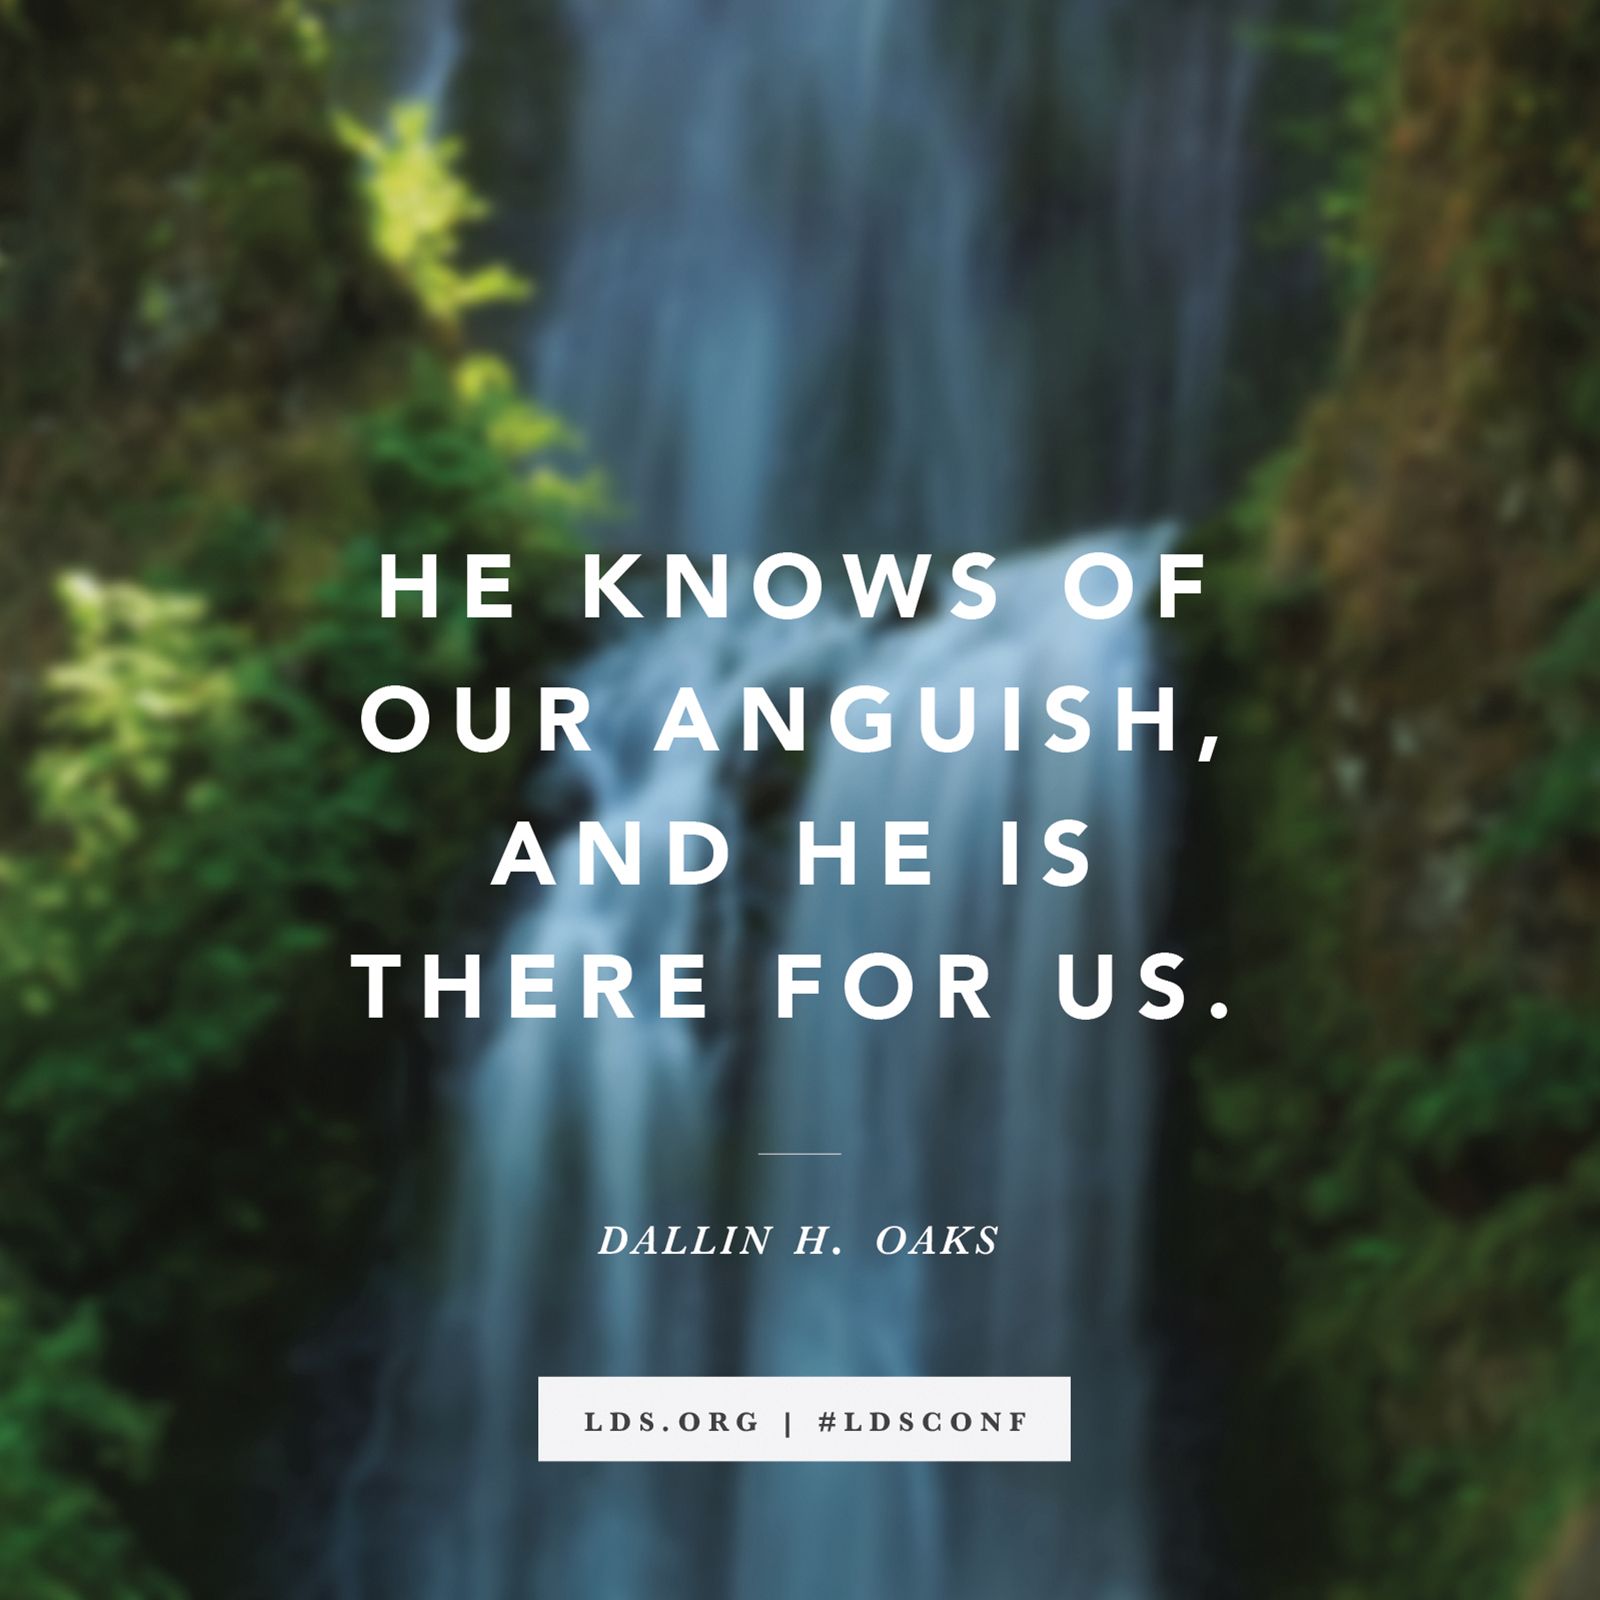 “He knows of our anguish, and He is there for us.” —Elder Dallin H. Oaks, “Strengthened by the Atonement of Jesus Christ”